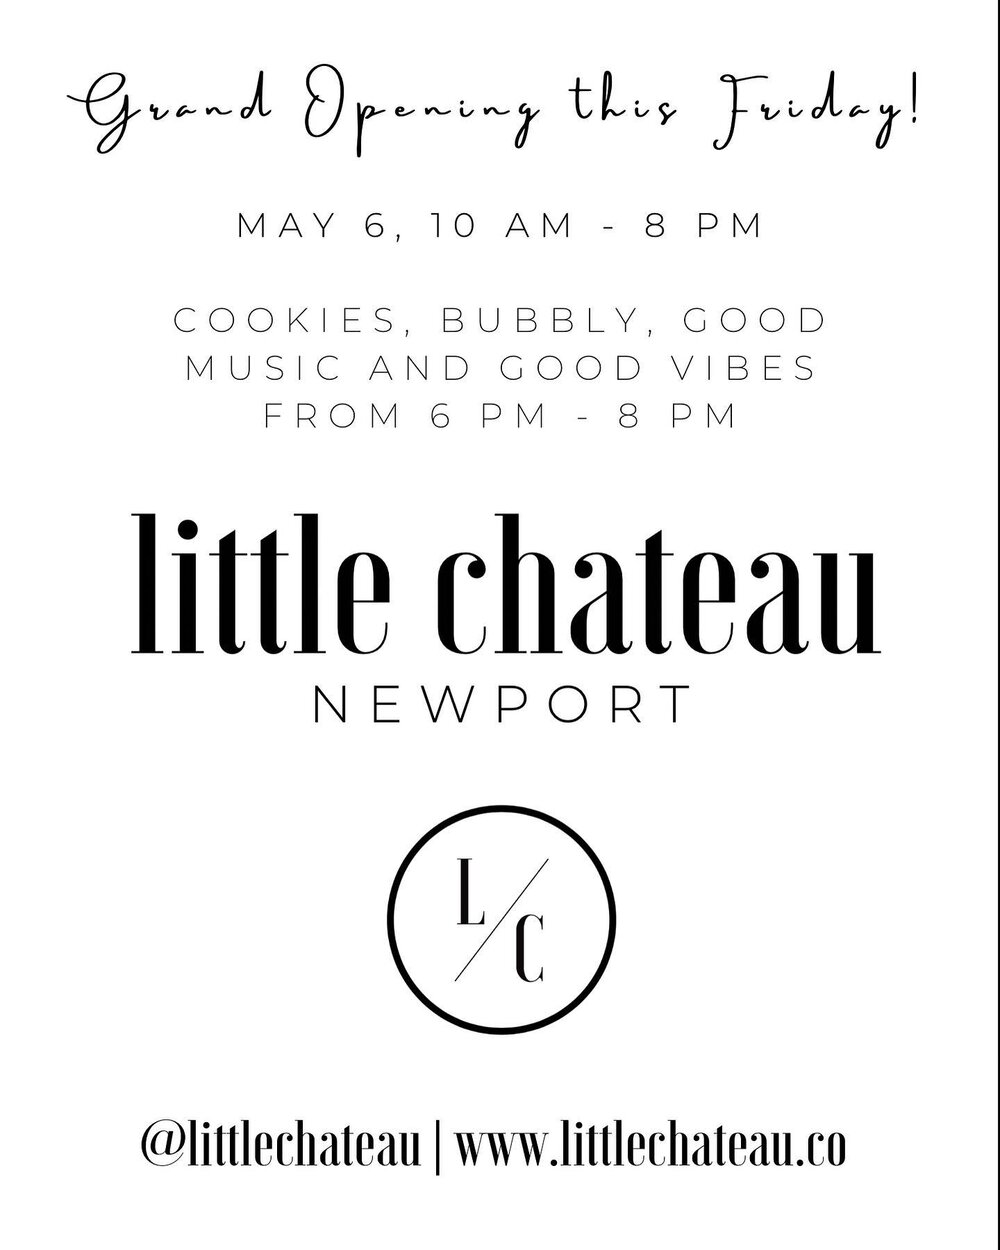 Please join us at our GRAND OPENING event this Friday, May 6 at 13 Touro Street in Newport, RI! Our doors will be open to the public at 10 am and later in the evening we will have a ~little chateau late night~ celebration with sweets, bubbly and alll